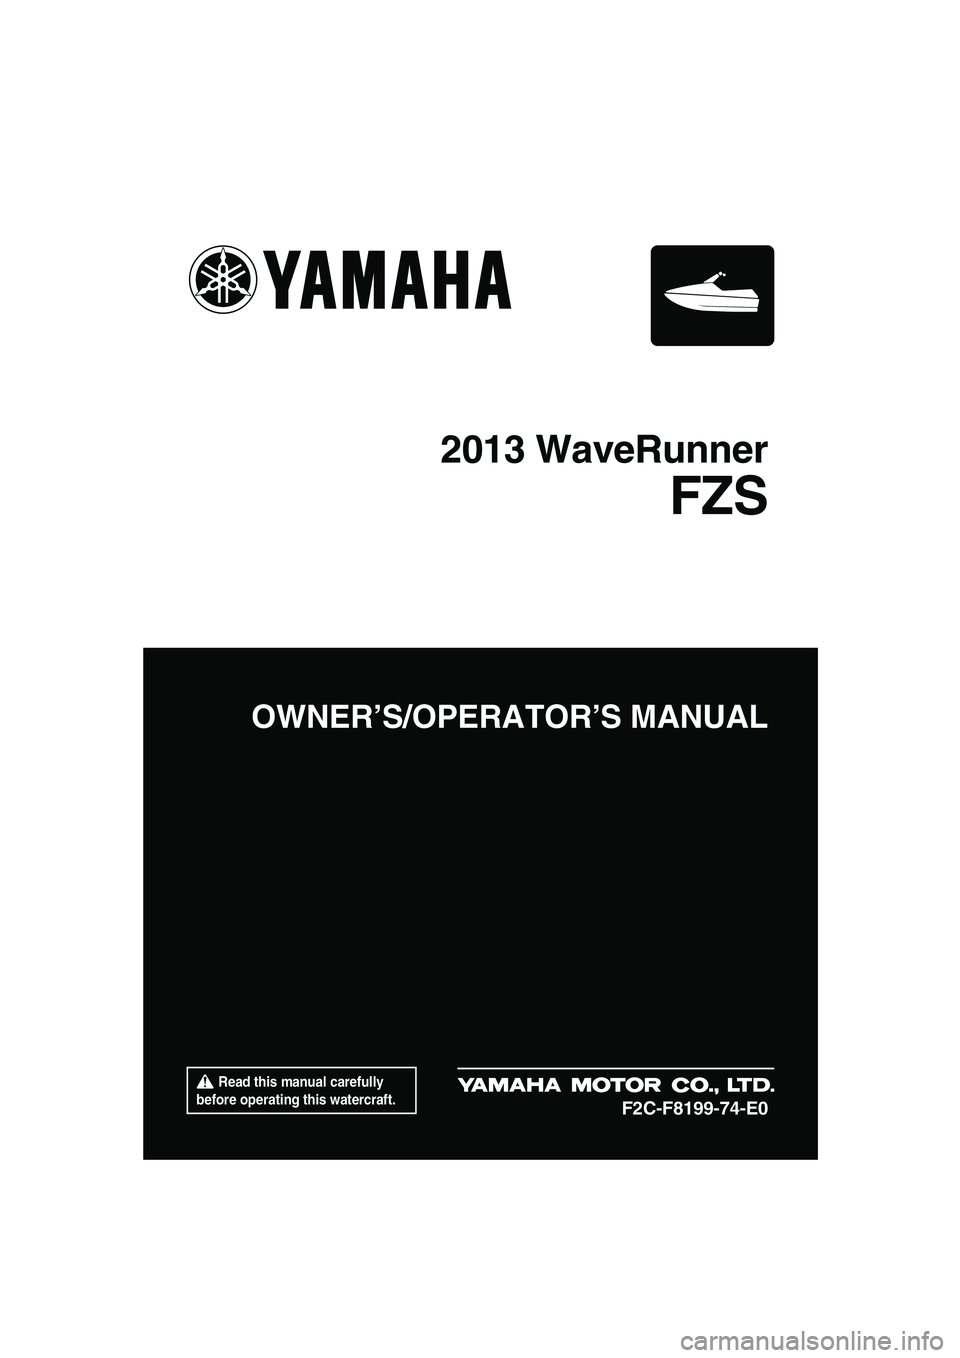 YAMAHA FZS 2013  Owners Manual  Read this manual carefully 
before operating this watercraft.
OWNER’S/OPERATOR’S MANUAL
2013 WaveRunner
FZS
F2C-F8199-74-E0
UF2C74E0.book  Page 1  Friday, August 3, 2012  2:34 PM 